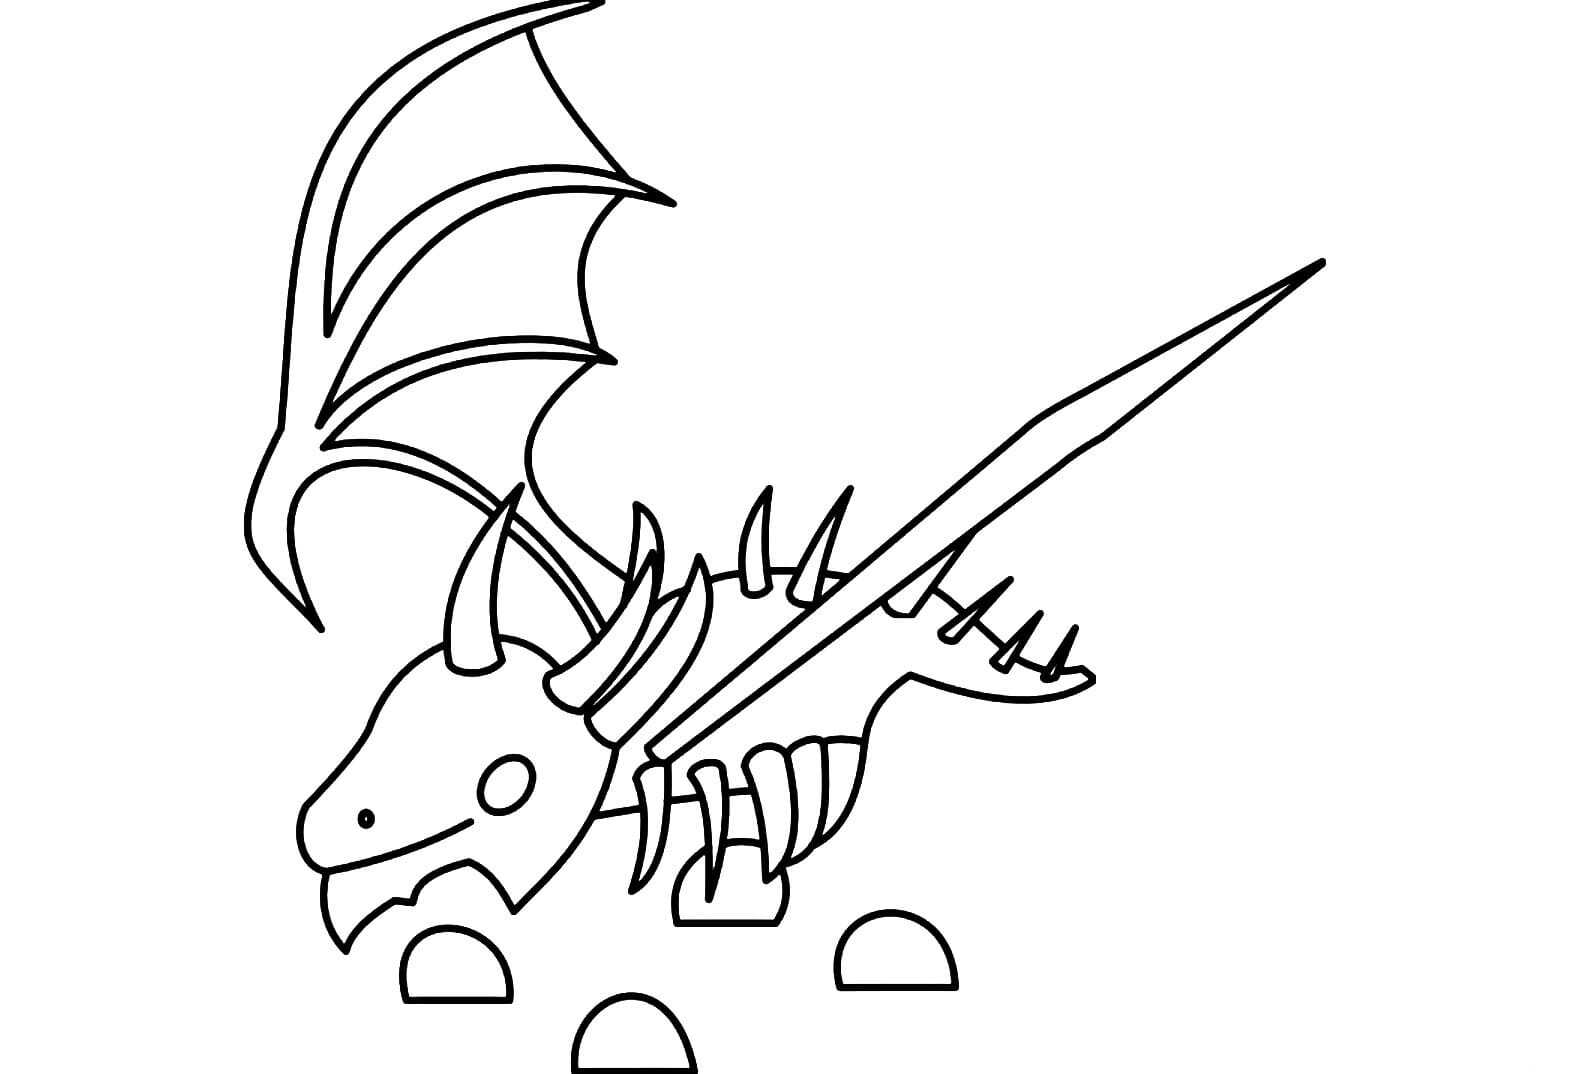 Adopt me Shadow Dragon has a partially exposed rib cage Coloring Pages